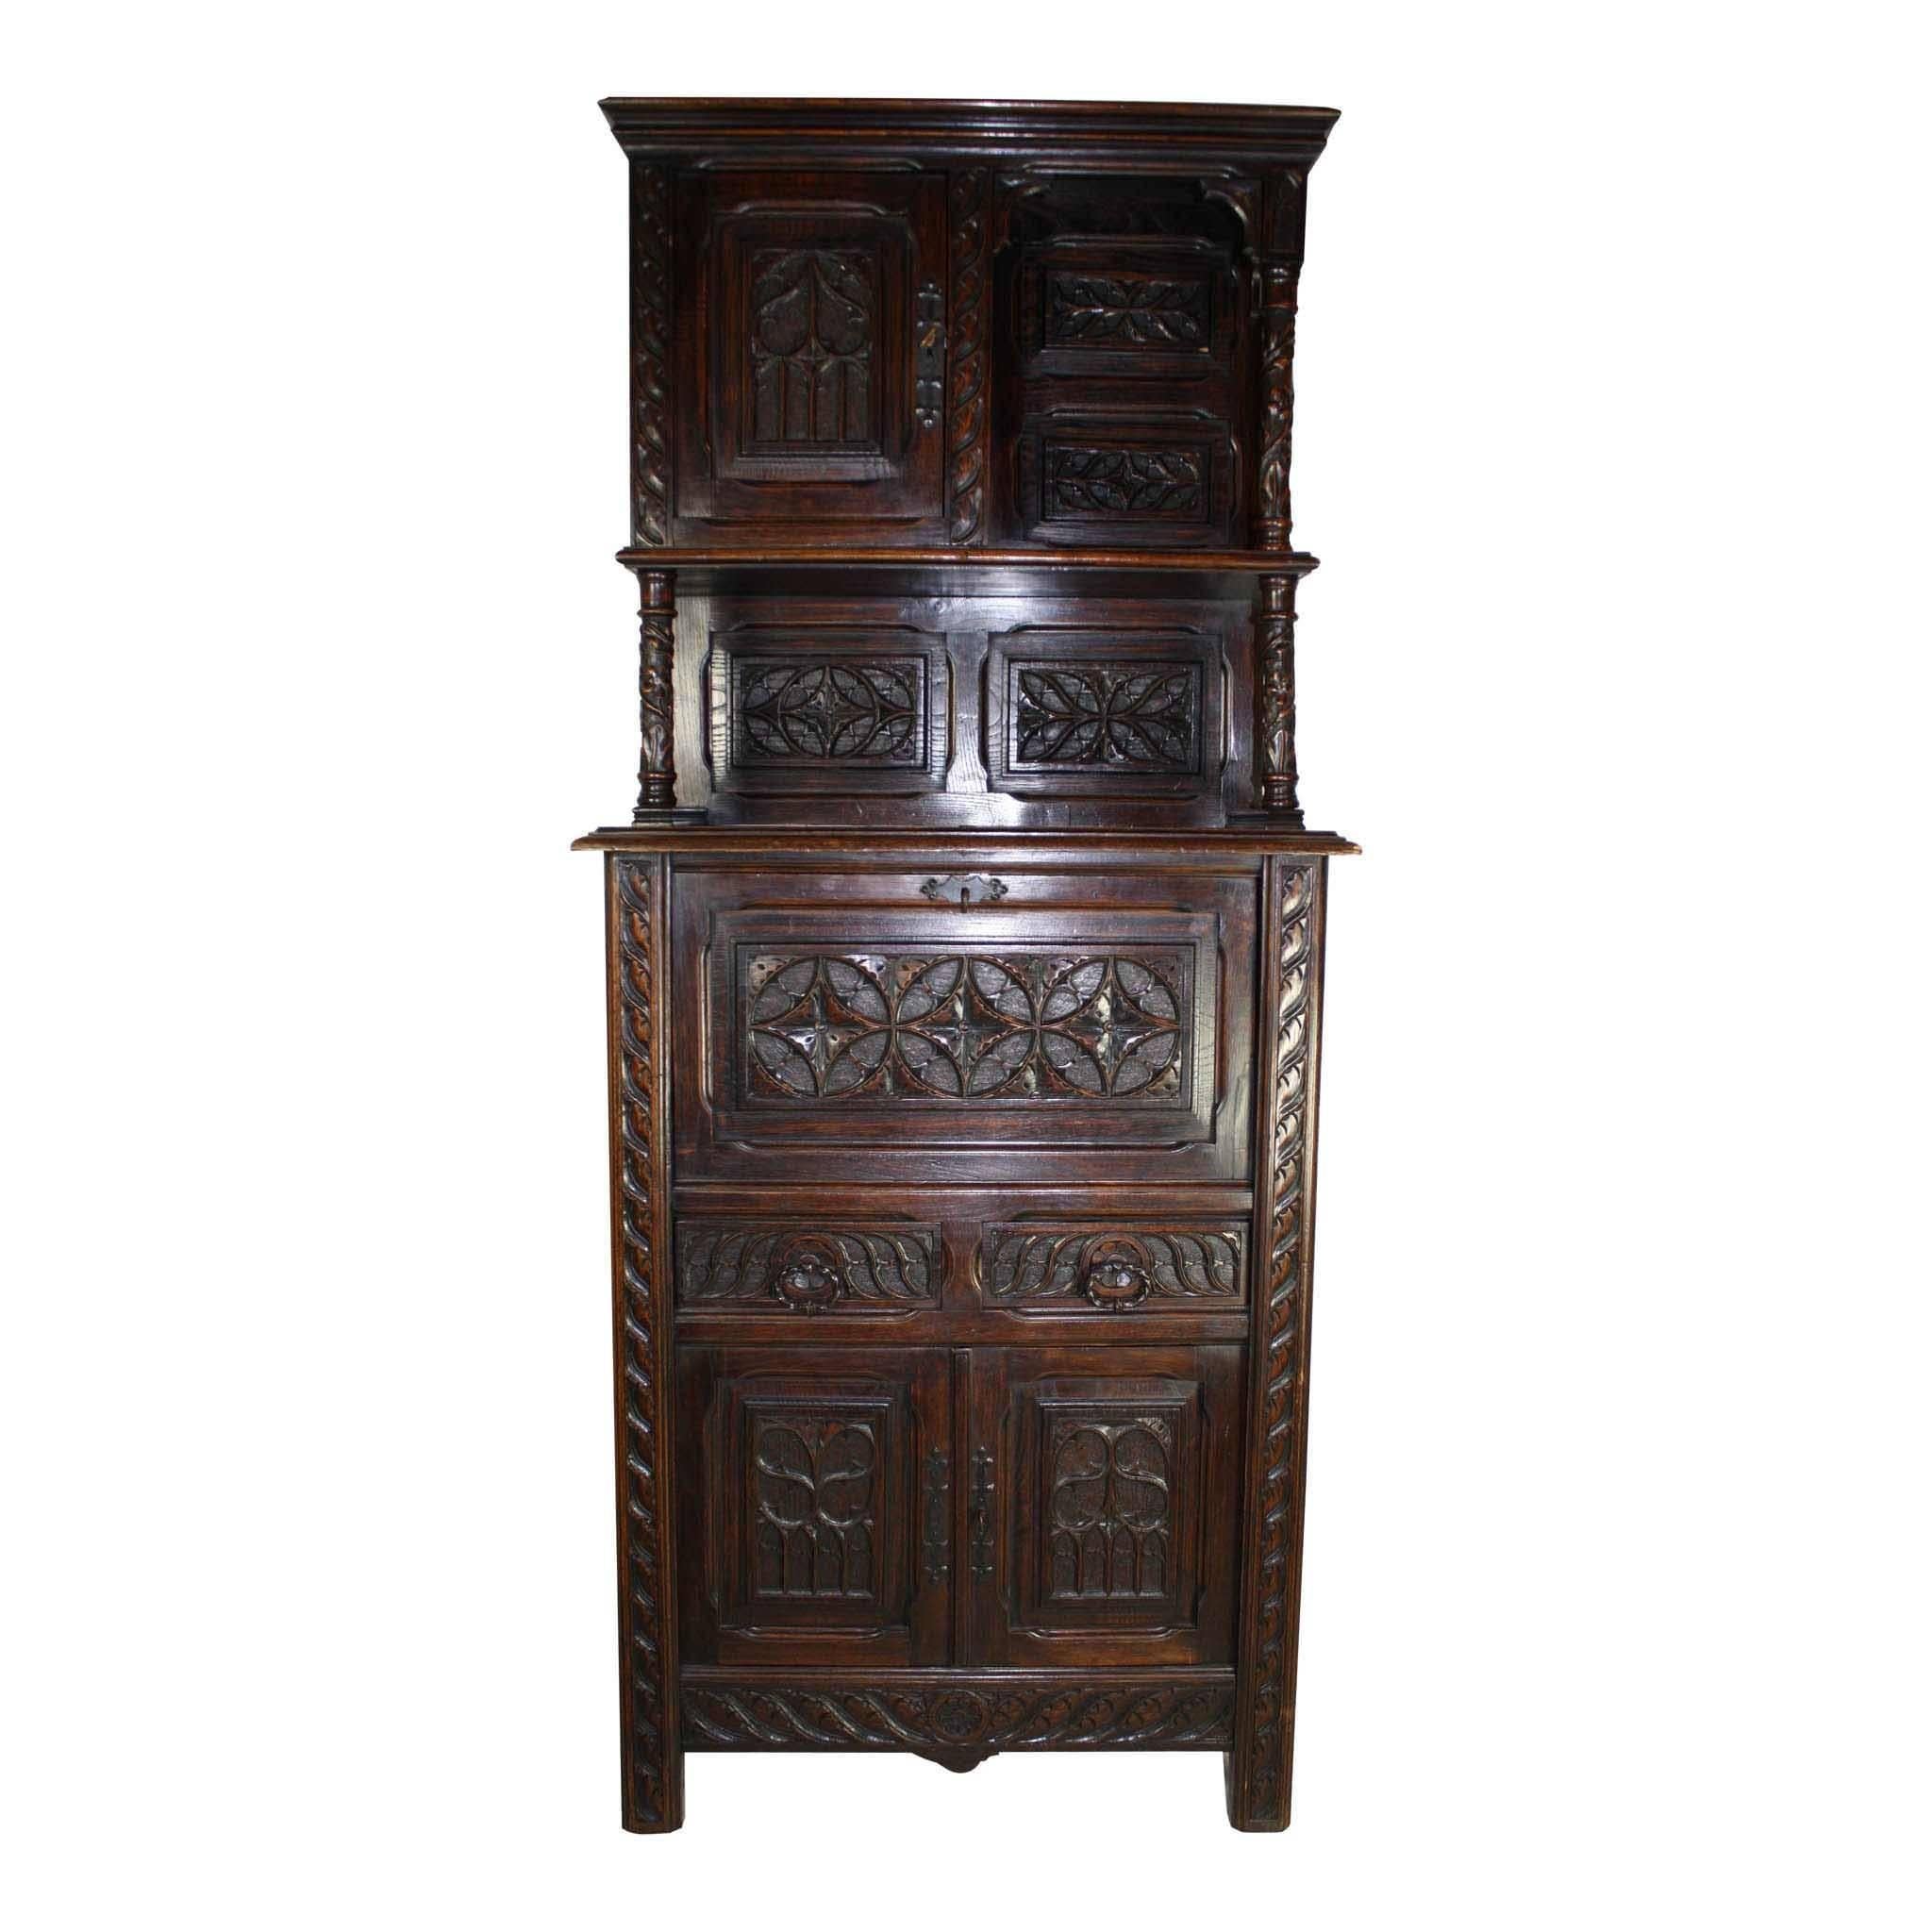 Gothic Revival Carved Walnut Cabinet, circa 1900, Two Available